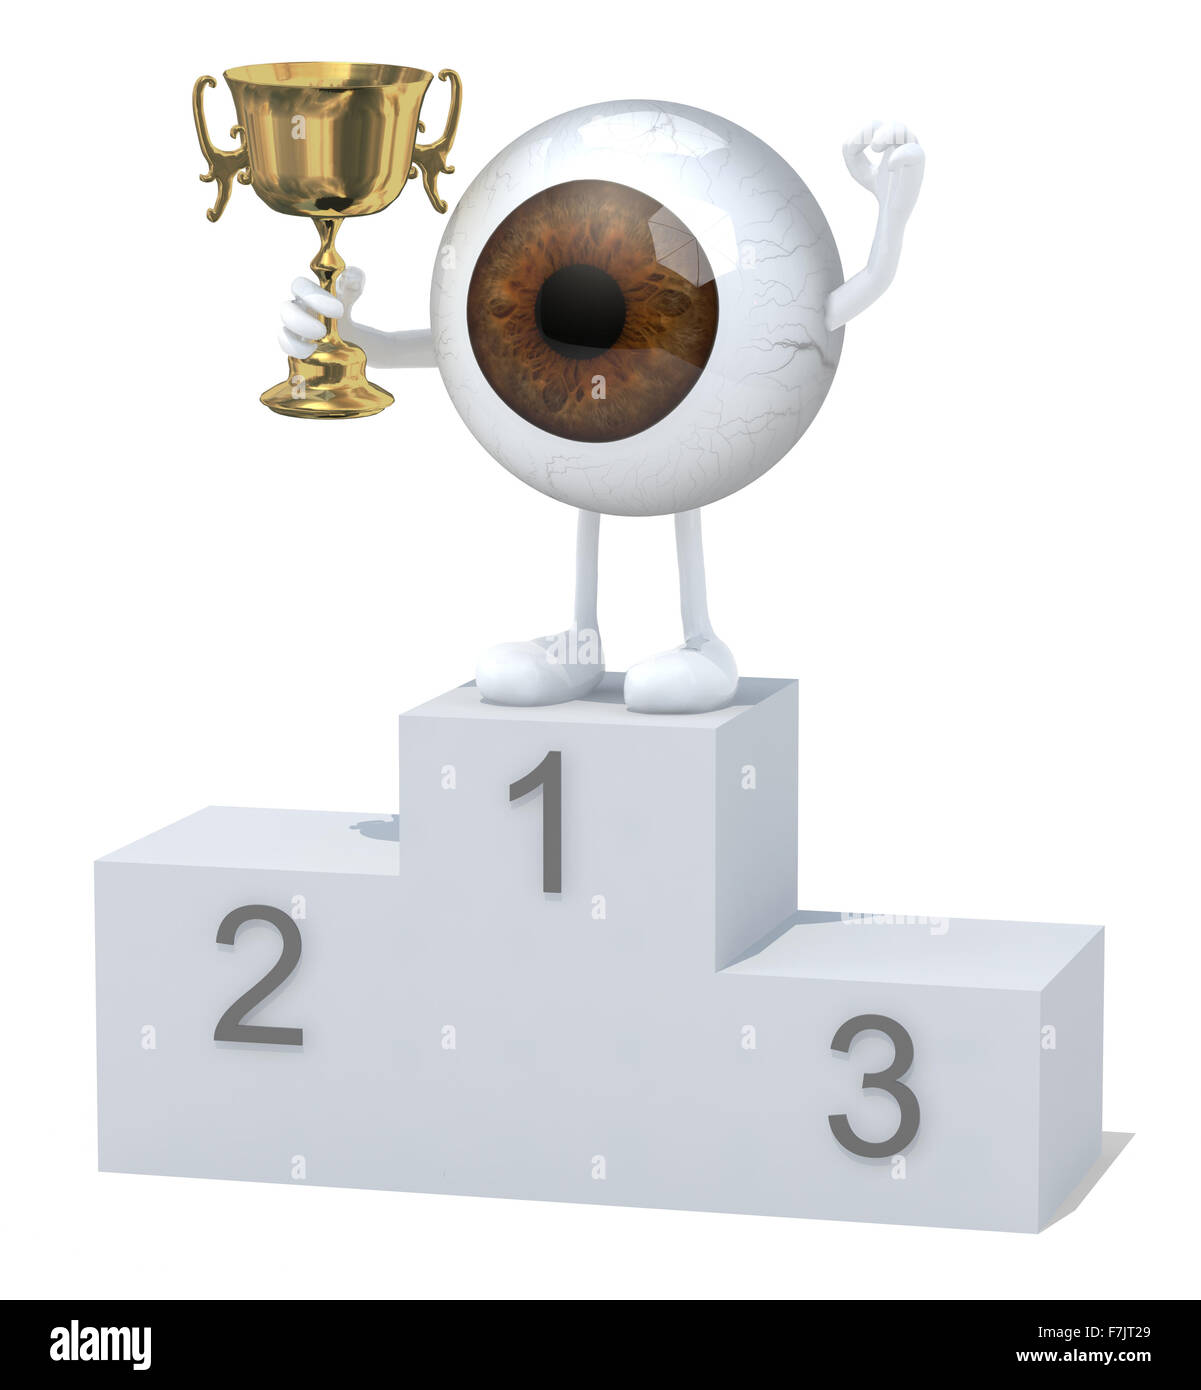 eyeball with arms, legs and winner cup on sports victory podium Stock Photo